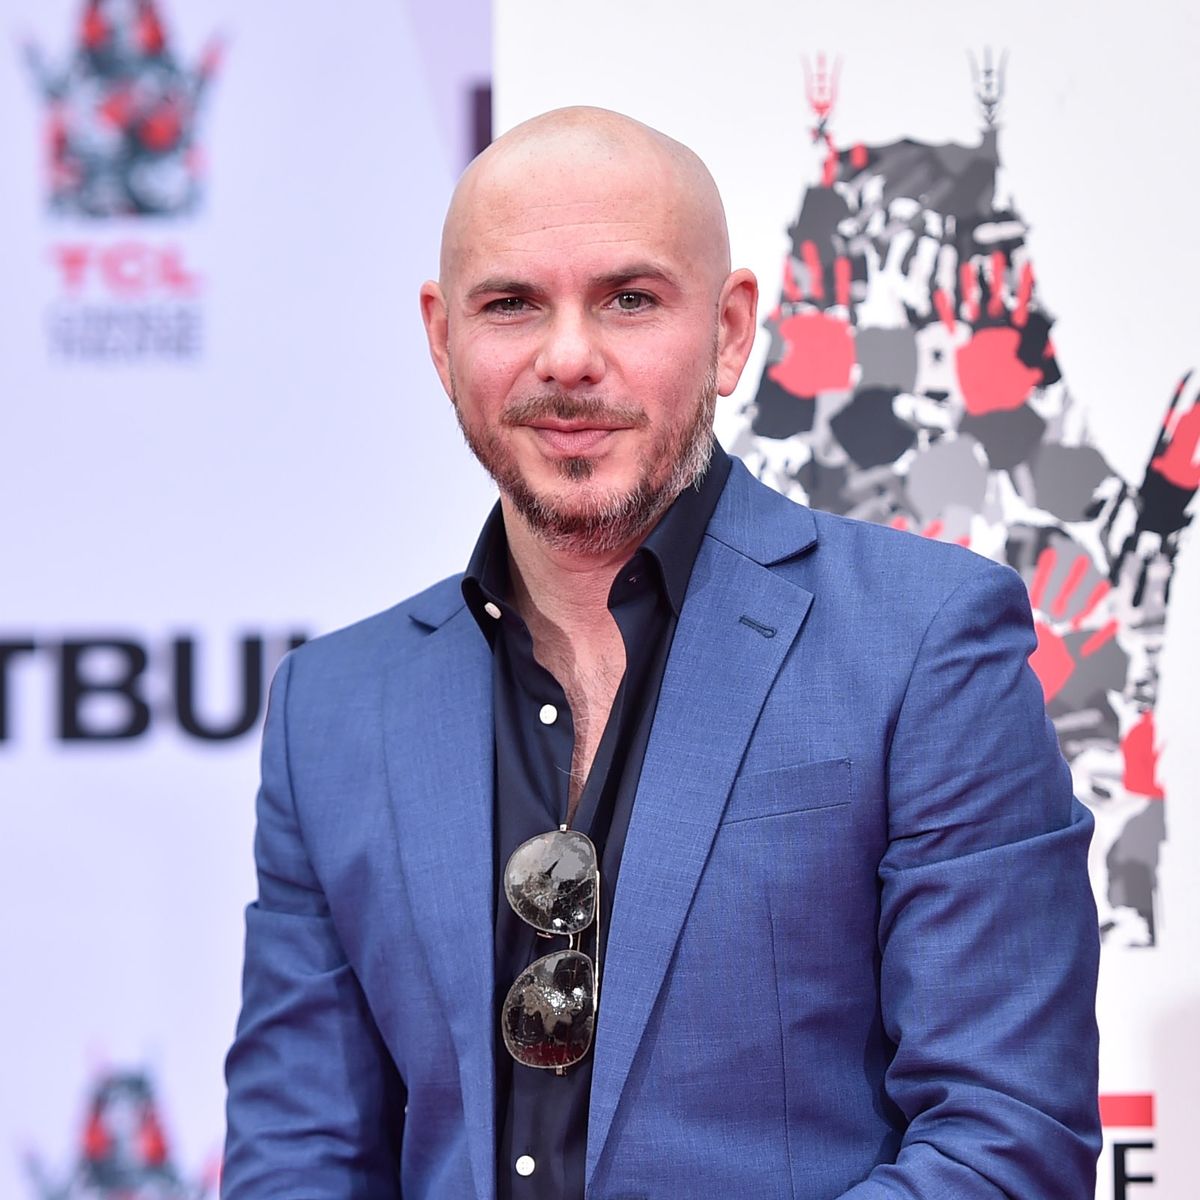 Pitbull attends the Hand And Footprint Ceremony Honoring him at TCL Chinese Theatre on December 14, 2018 in Hollywood, California. (Photo by Alberto E. Rodriguez/Getty Images)